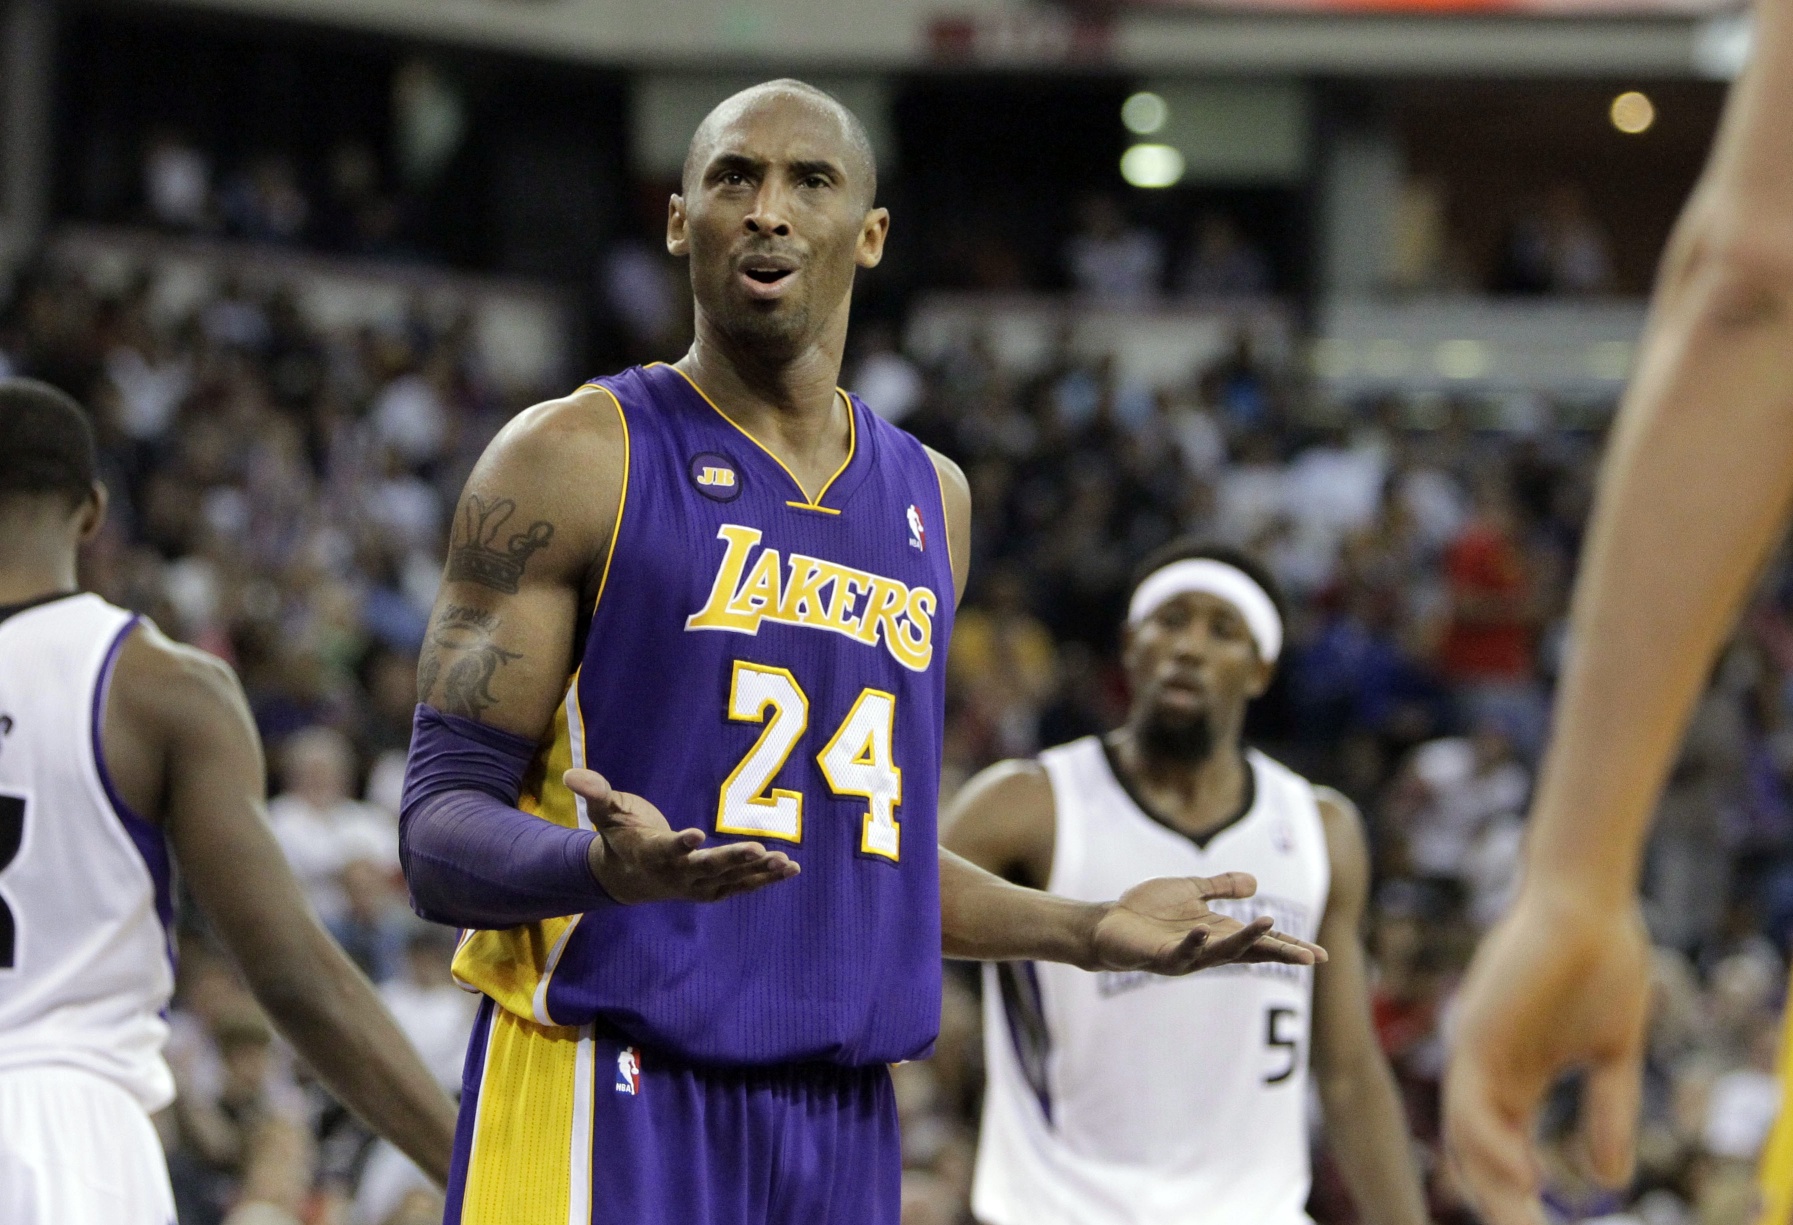 Los Angeles Lakers guard Kobe Bryant reacts after being called for a foul during the third quarter against the Sacramento Kings in an NBA basketball game in Sacramento, California. Photo: AP